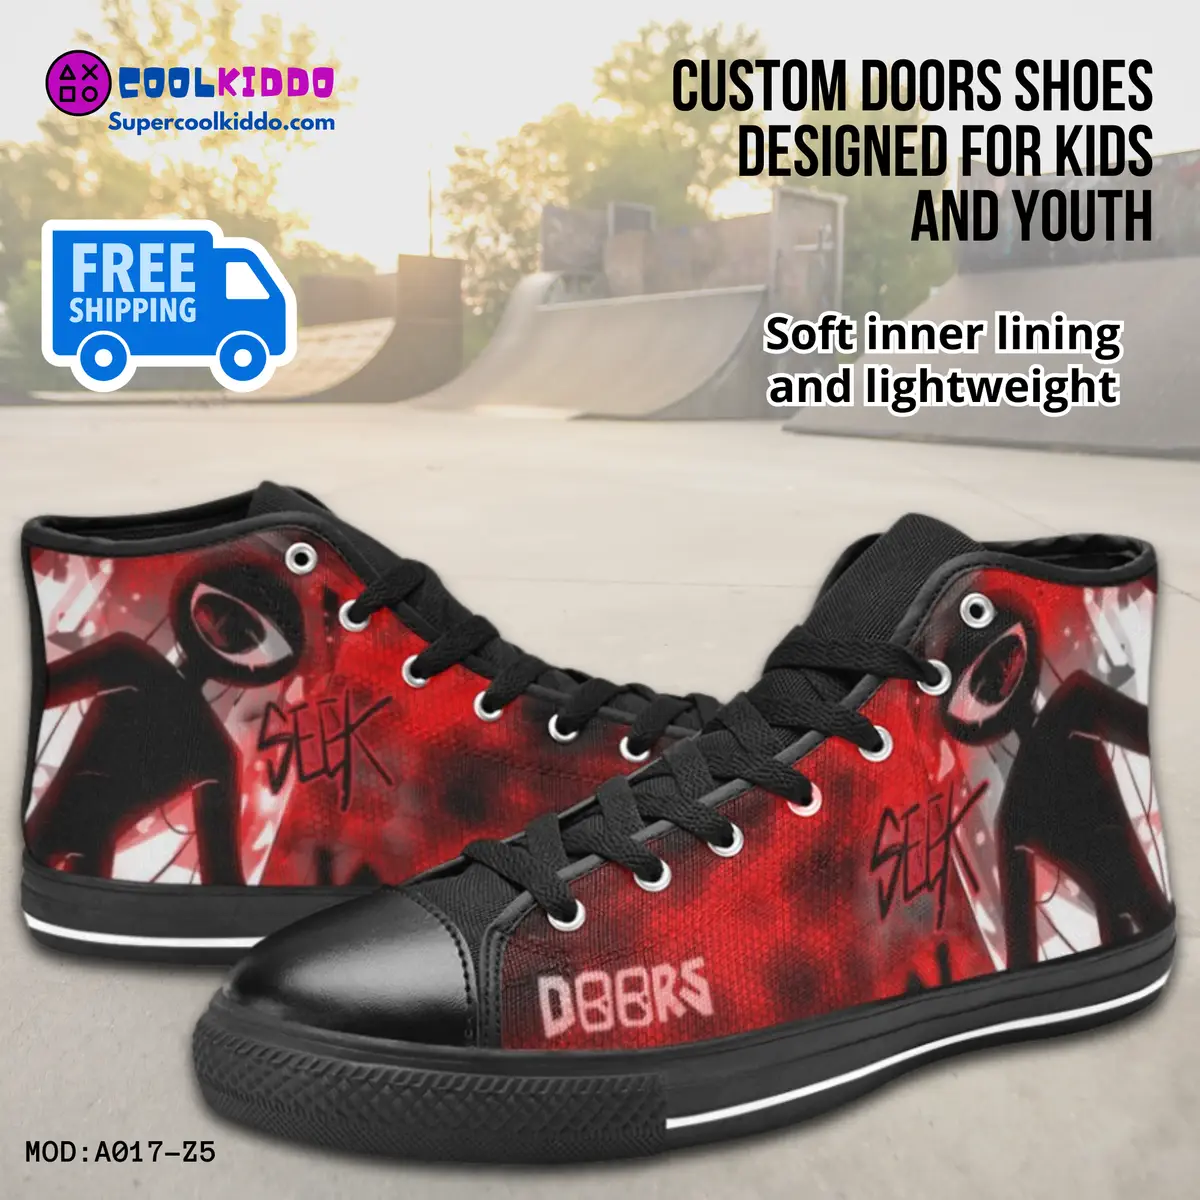 Roblox Doors Inspired High Top Shoes for Kids/Youth – “Seek” Character Print. High-Top Sneakers Cool Kiddo 12